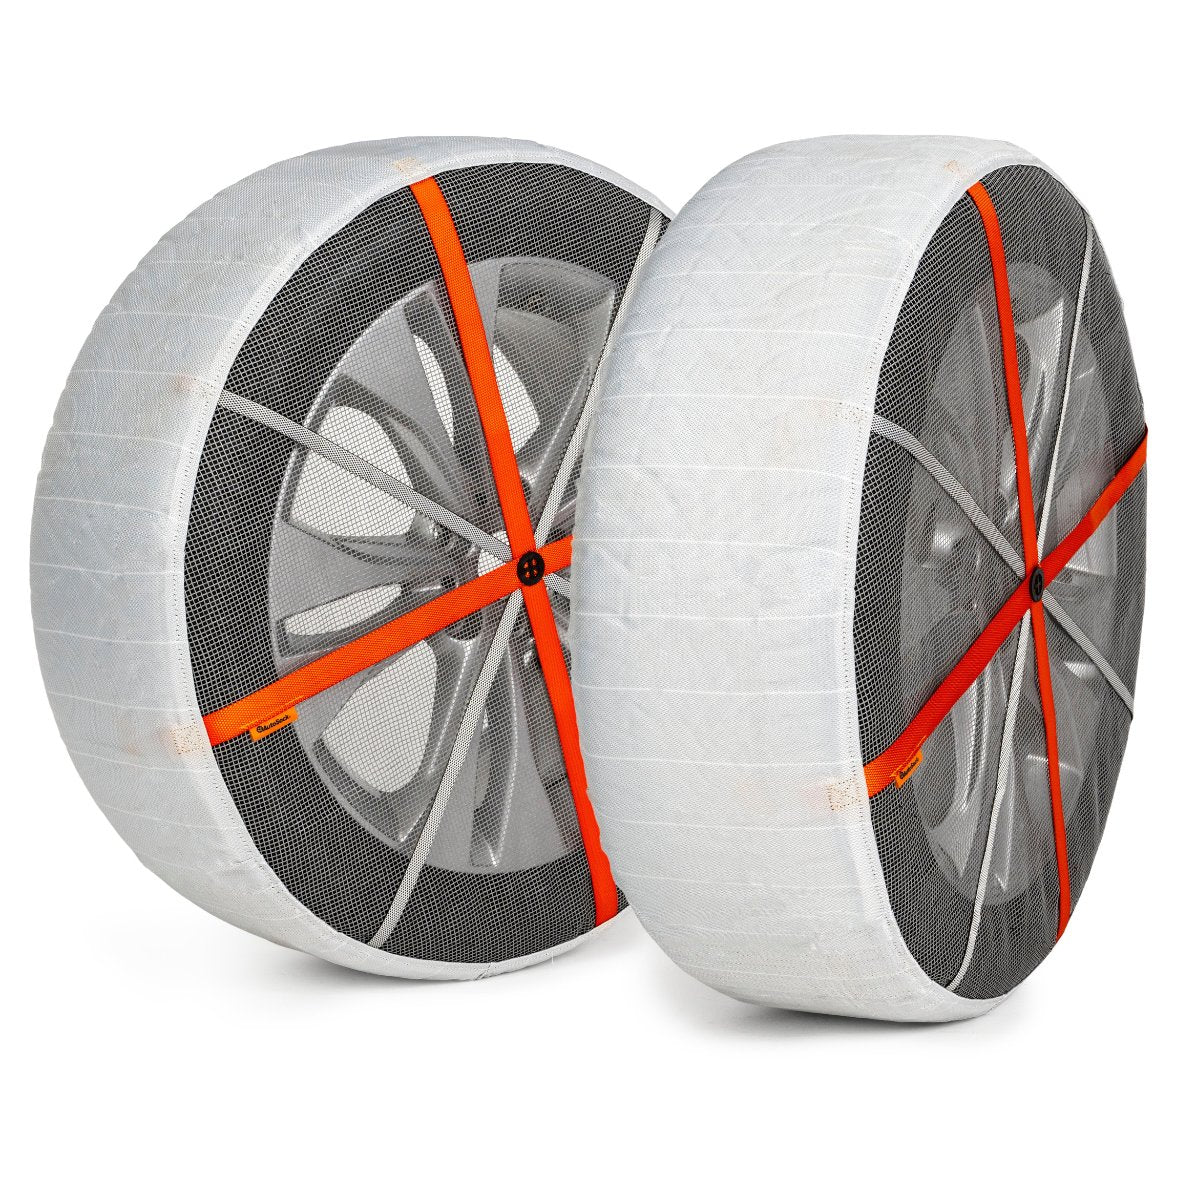 Pair of AutoSock textile snow chains installed on two wheels in front of white background showing product frontside AL111 AL 111